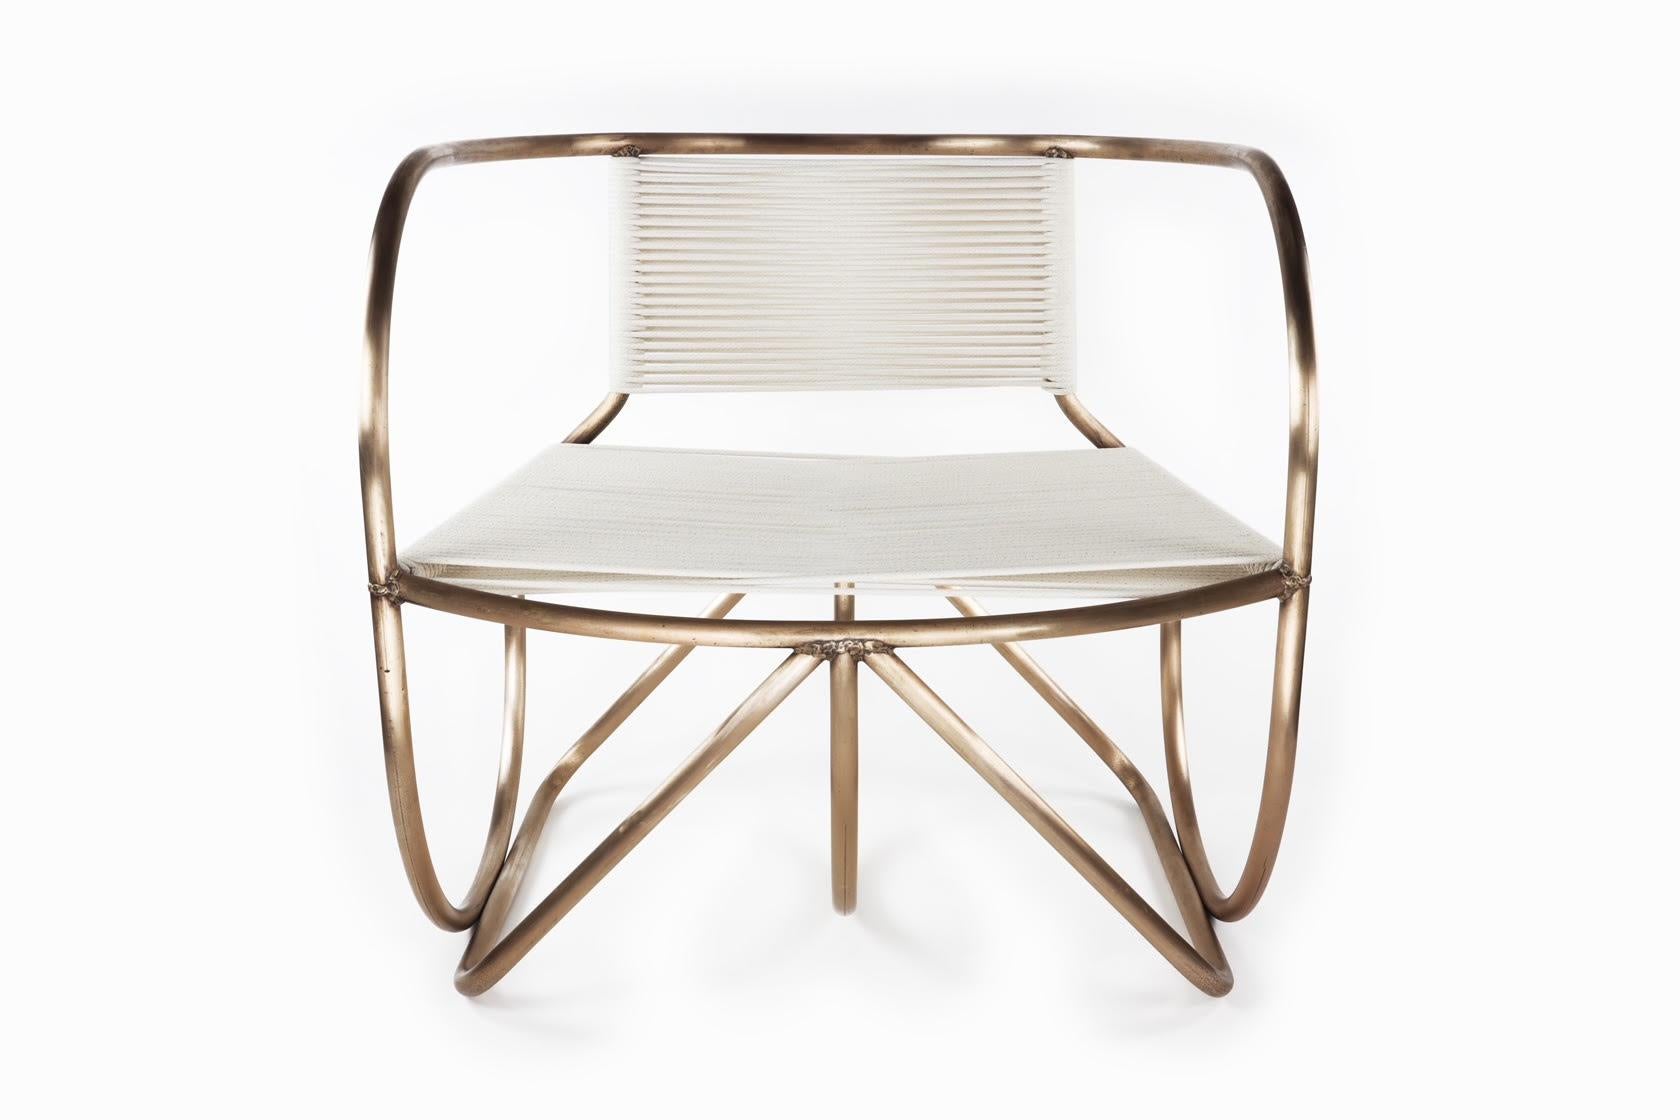 Bronze tube is masterfully bent to create the oversized frame of the Restraint Rocker Lounge Chair. The lines suggest that maybe it is a rocker, yet they are fluid curves that are stationary. The 1